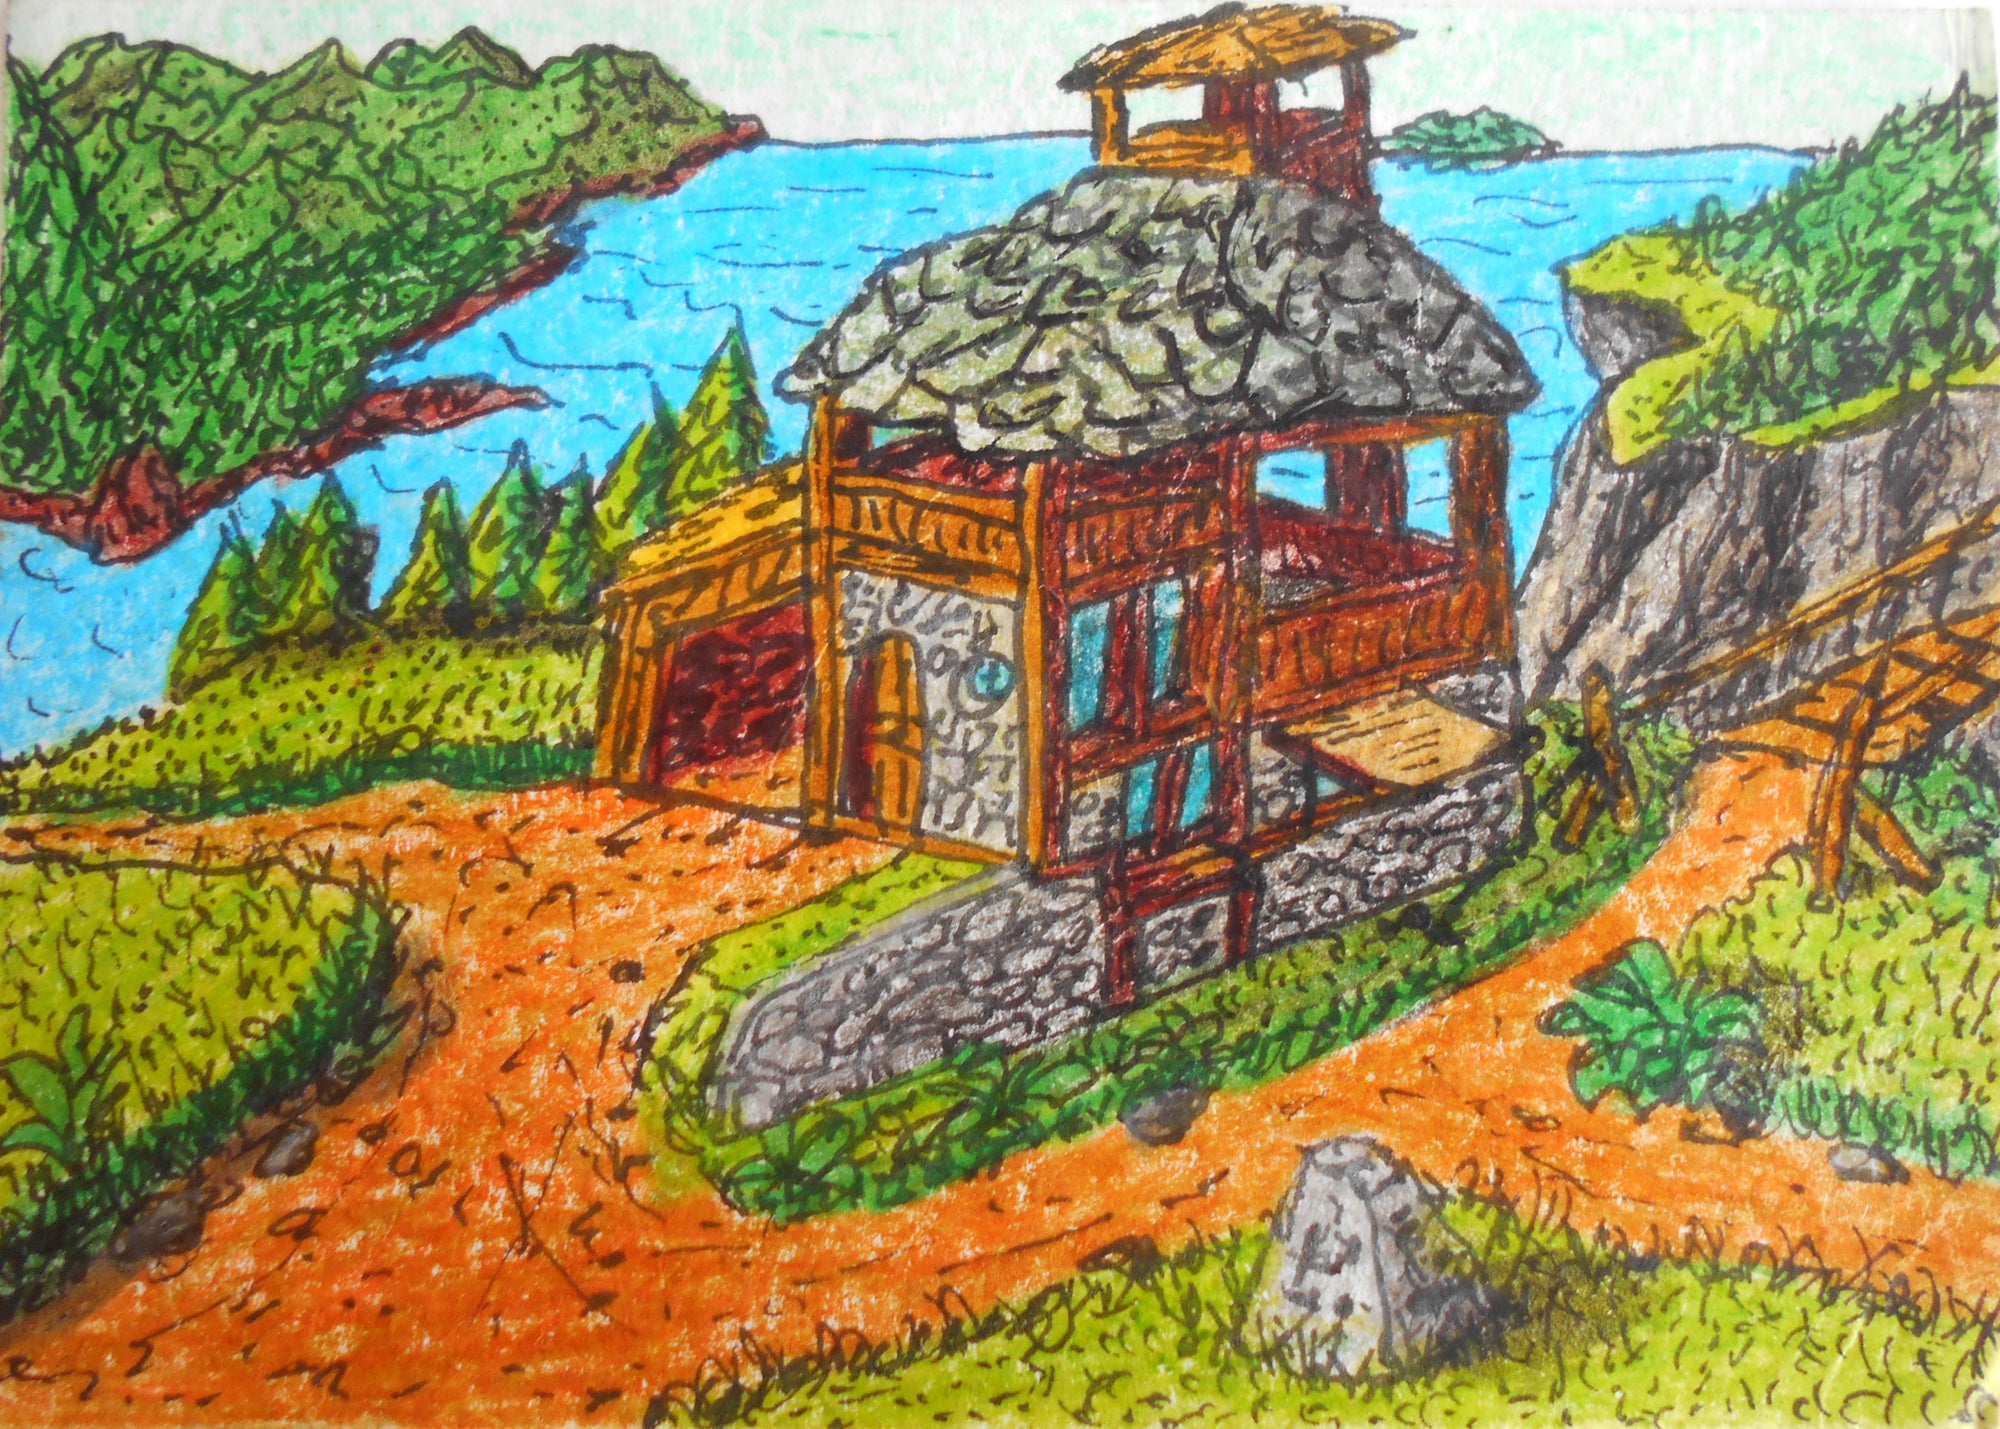 Cottage art print from original drawing- fantasy art collectable landscape card- ink and pencil drawing from The Realm of Exdourn fantasy story- 'Cross-Norths outpost'- signed by artist Hristo Hvoynev